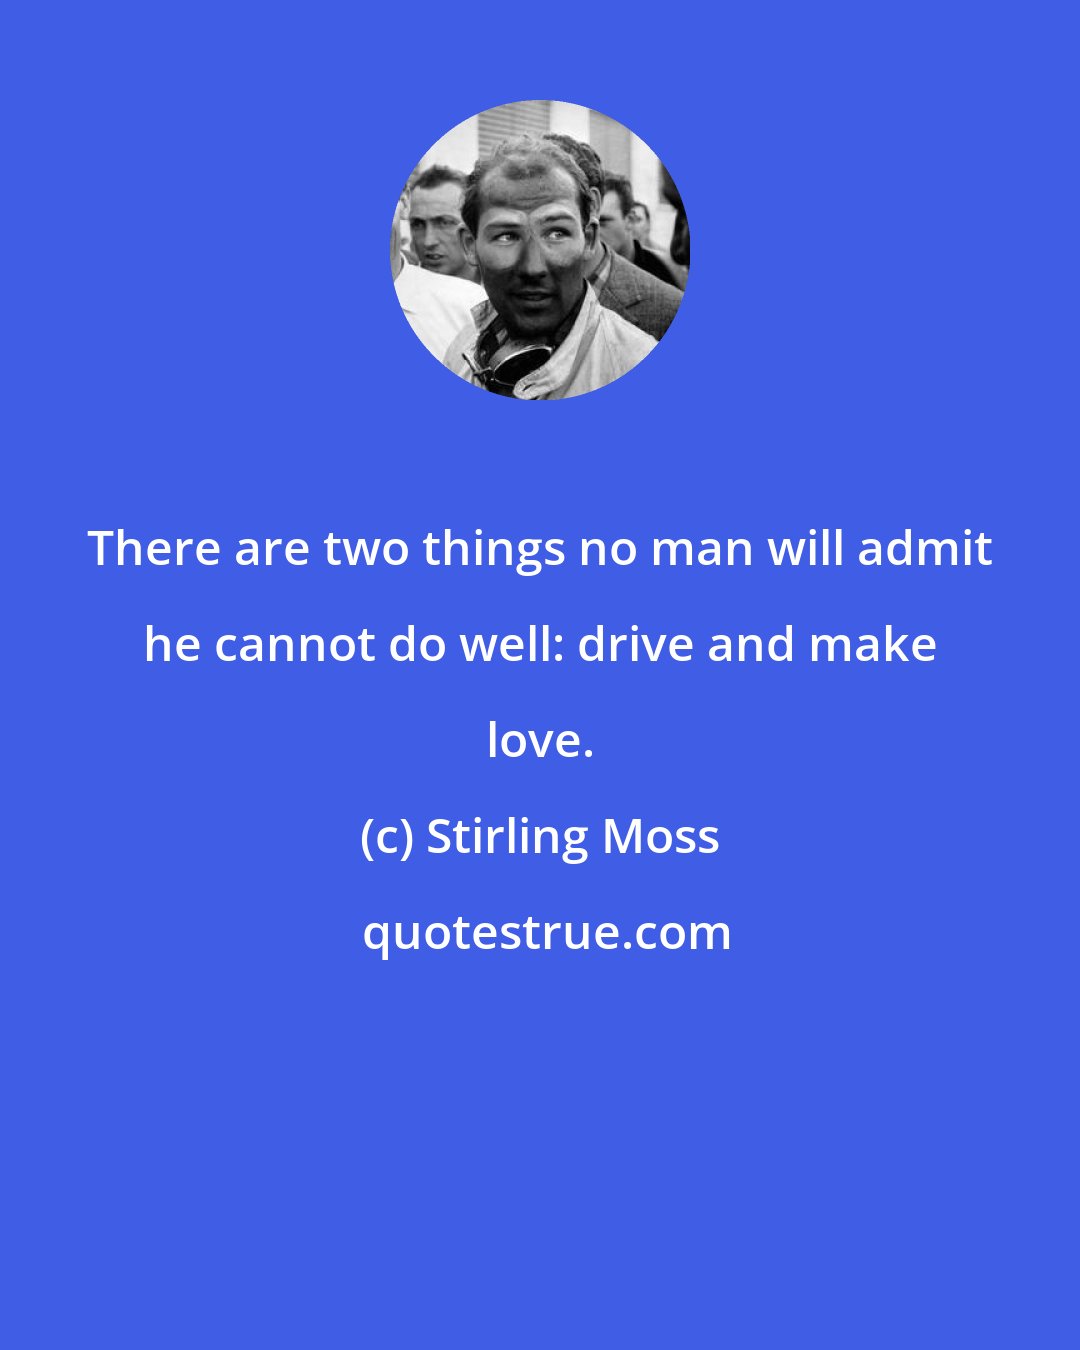 Stirling Moss: There are two things no man will admit he cannot do well: drive and make love.